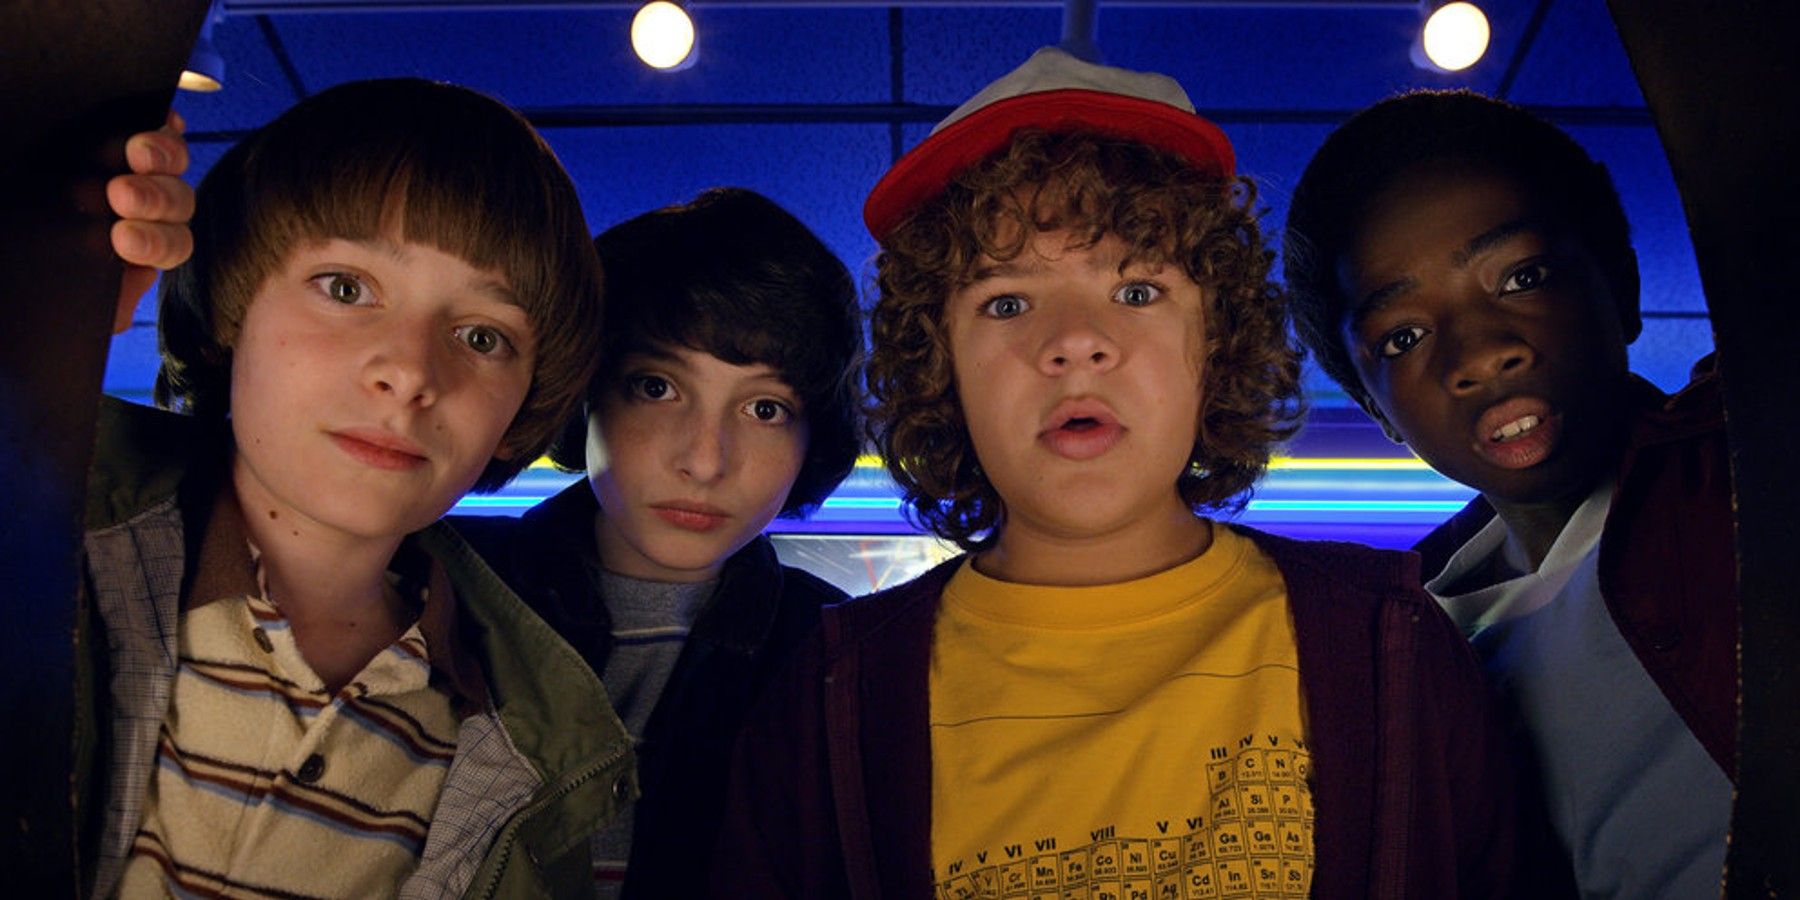 Will Byers, Mike Wheeler, Dustin Henderson, and Lucas Sinclair look at Dig Dug score in Stranger Things season 2